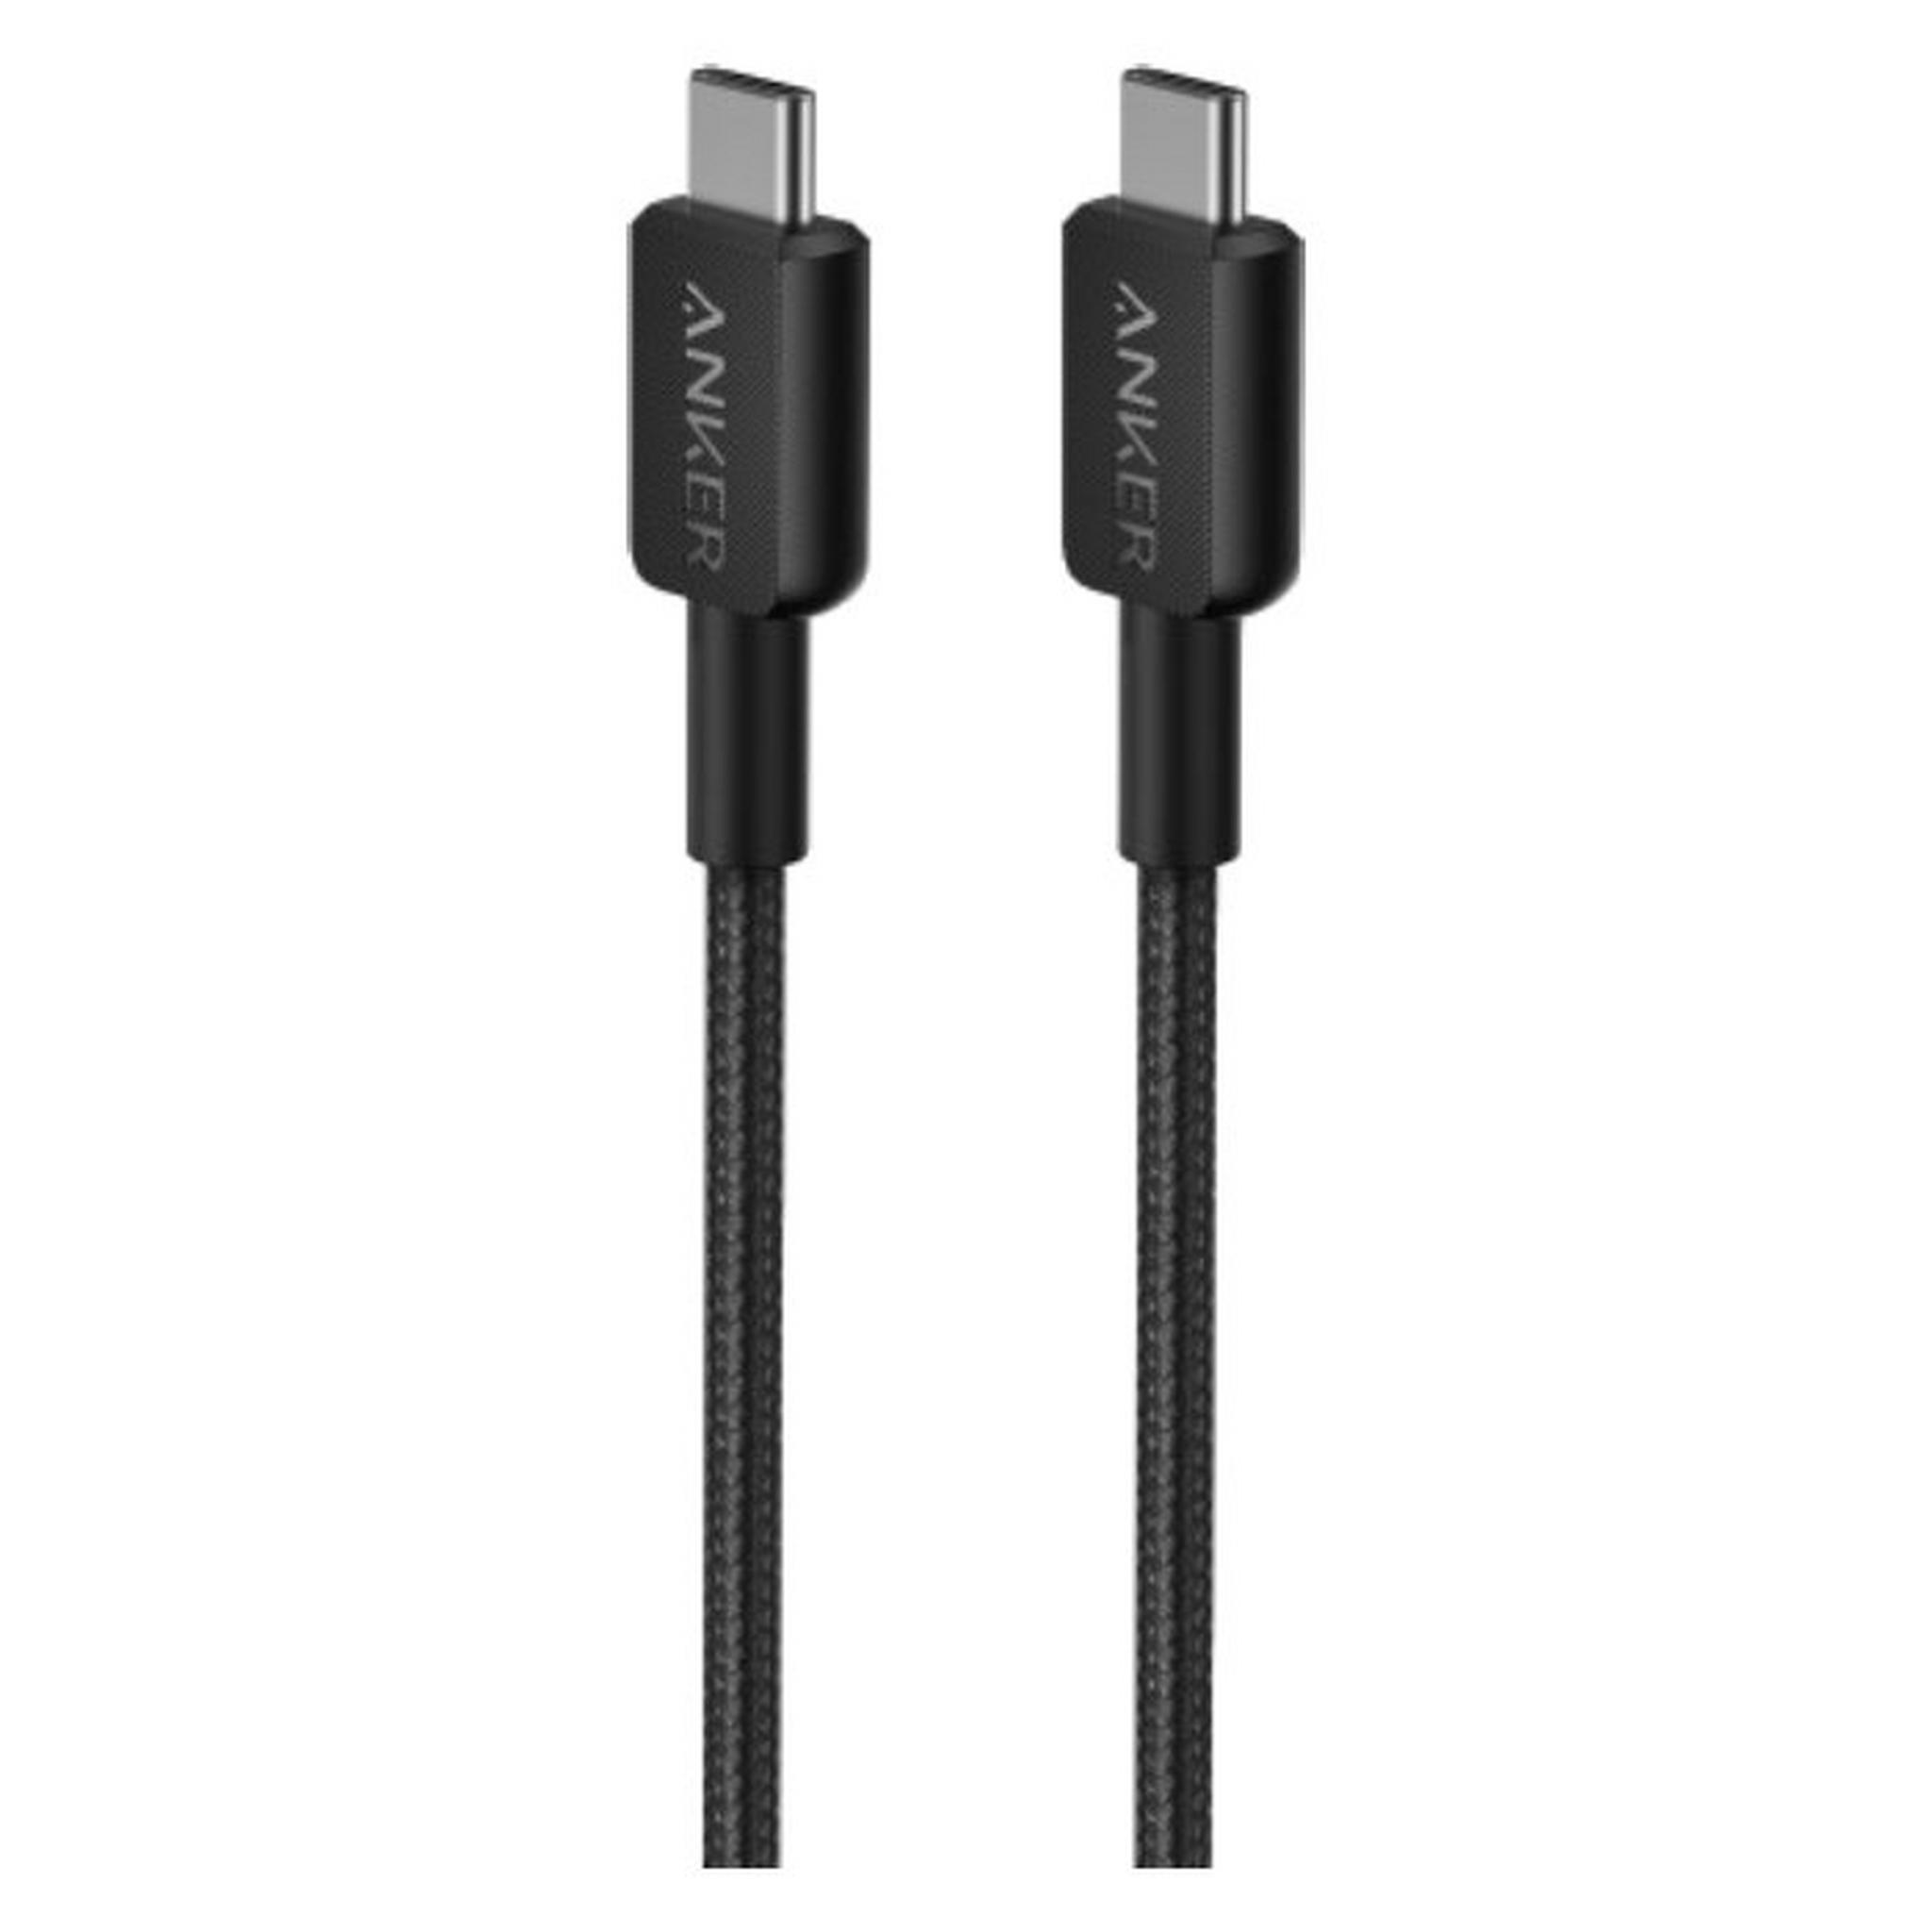 Anker 322 USB-C to USB-C Cable Braided (0.9m) - Black